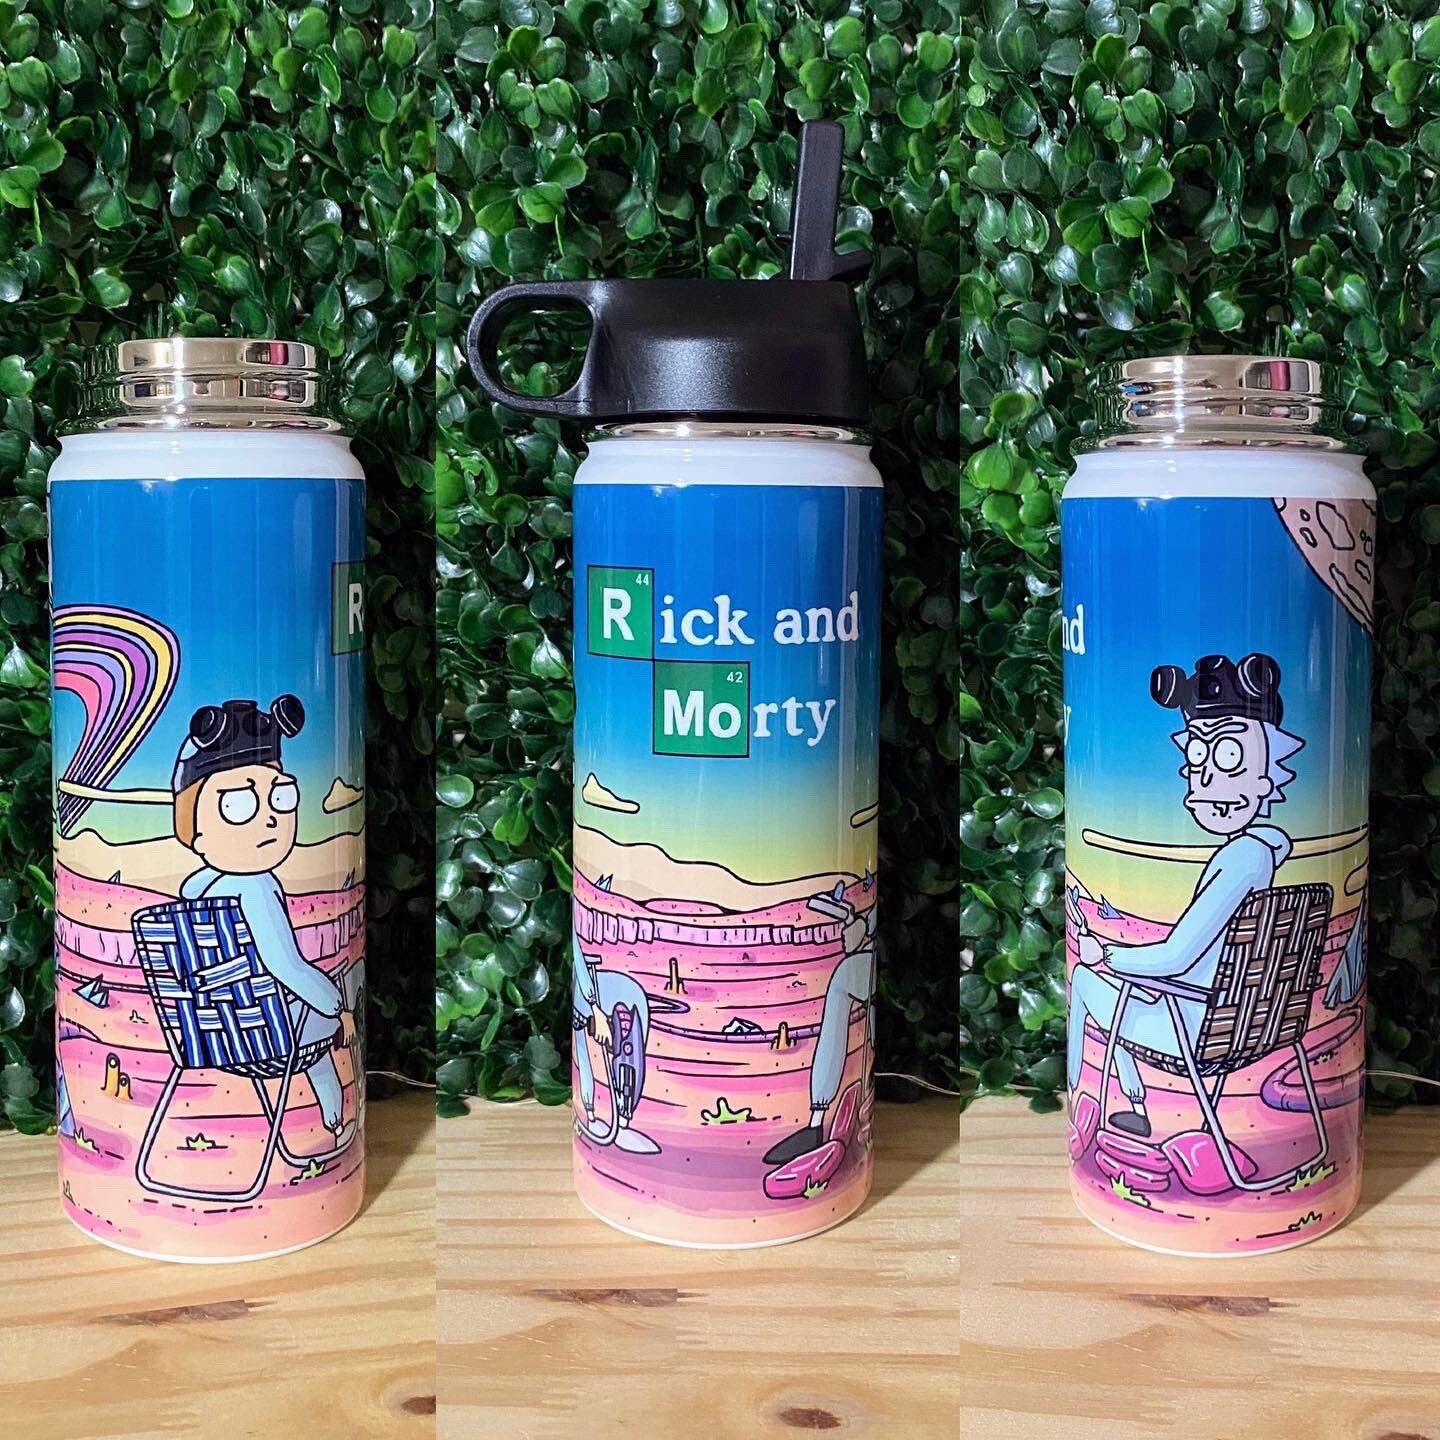 Rick & Morty Why Not Have Fun? Portable Insulated Water Bottle - White  Homeware - Zavvi US